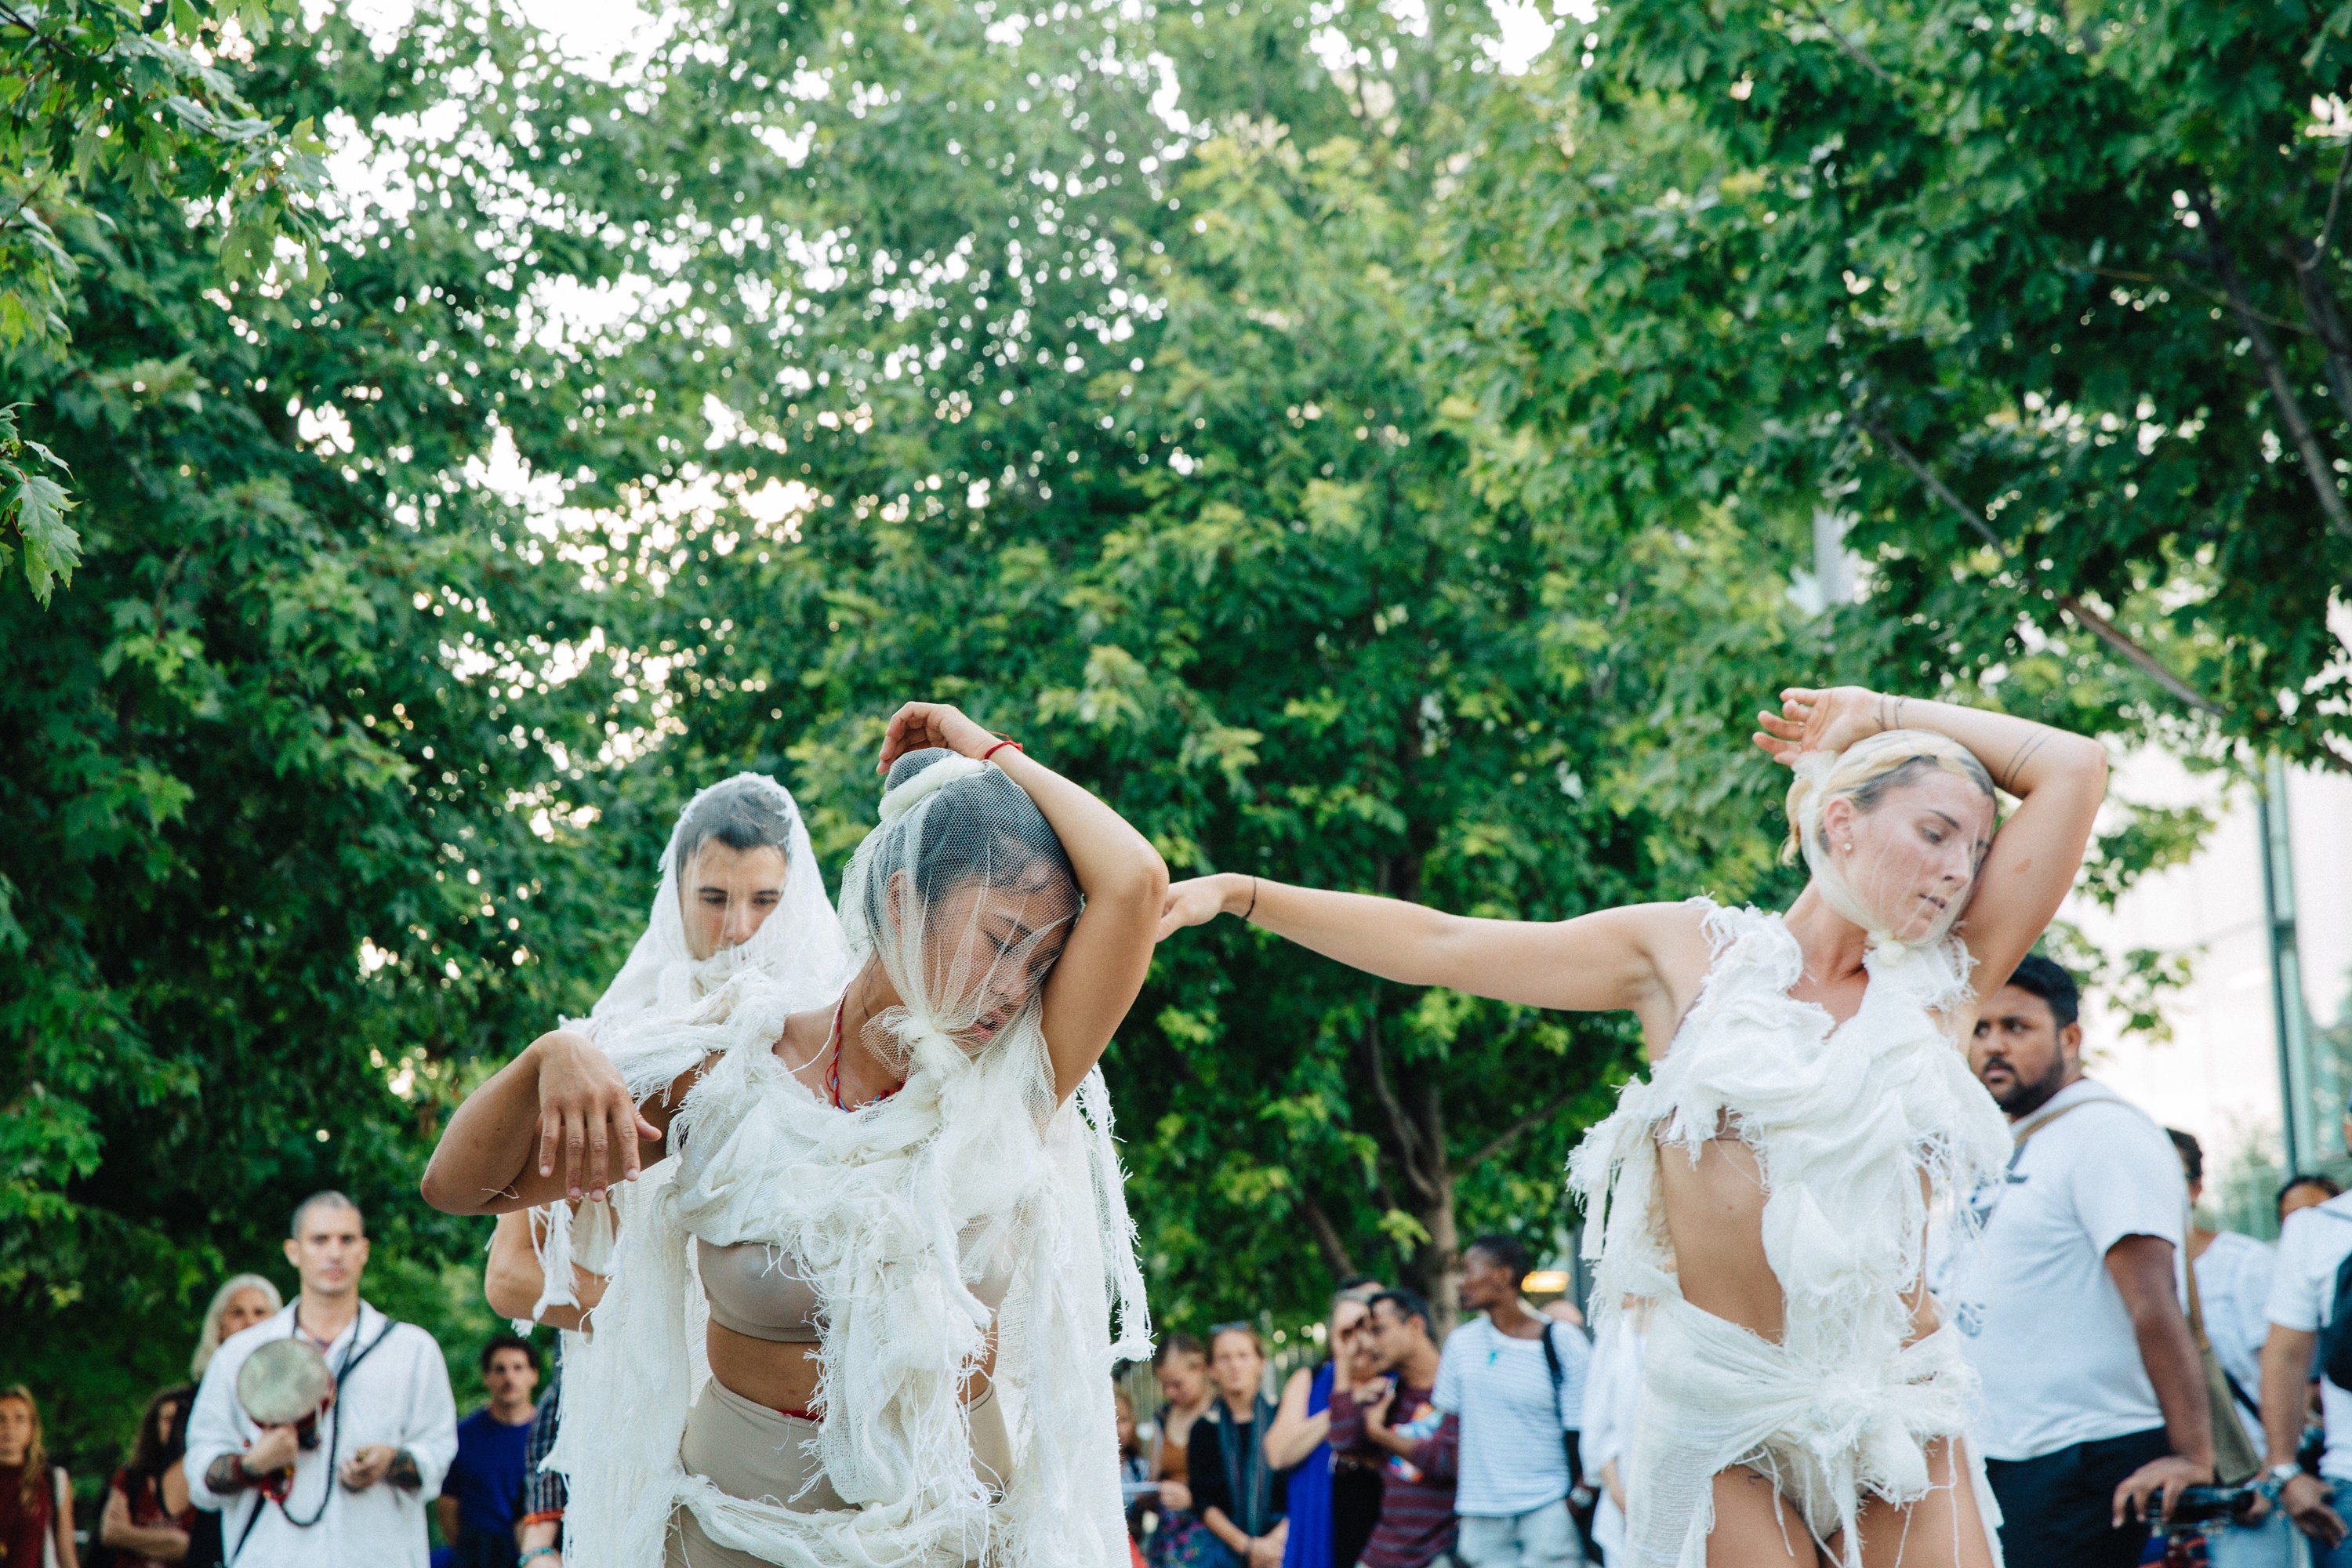 Performers draped in white make their way down the water’s edge promenade to Sherbourne Common.